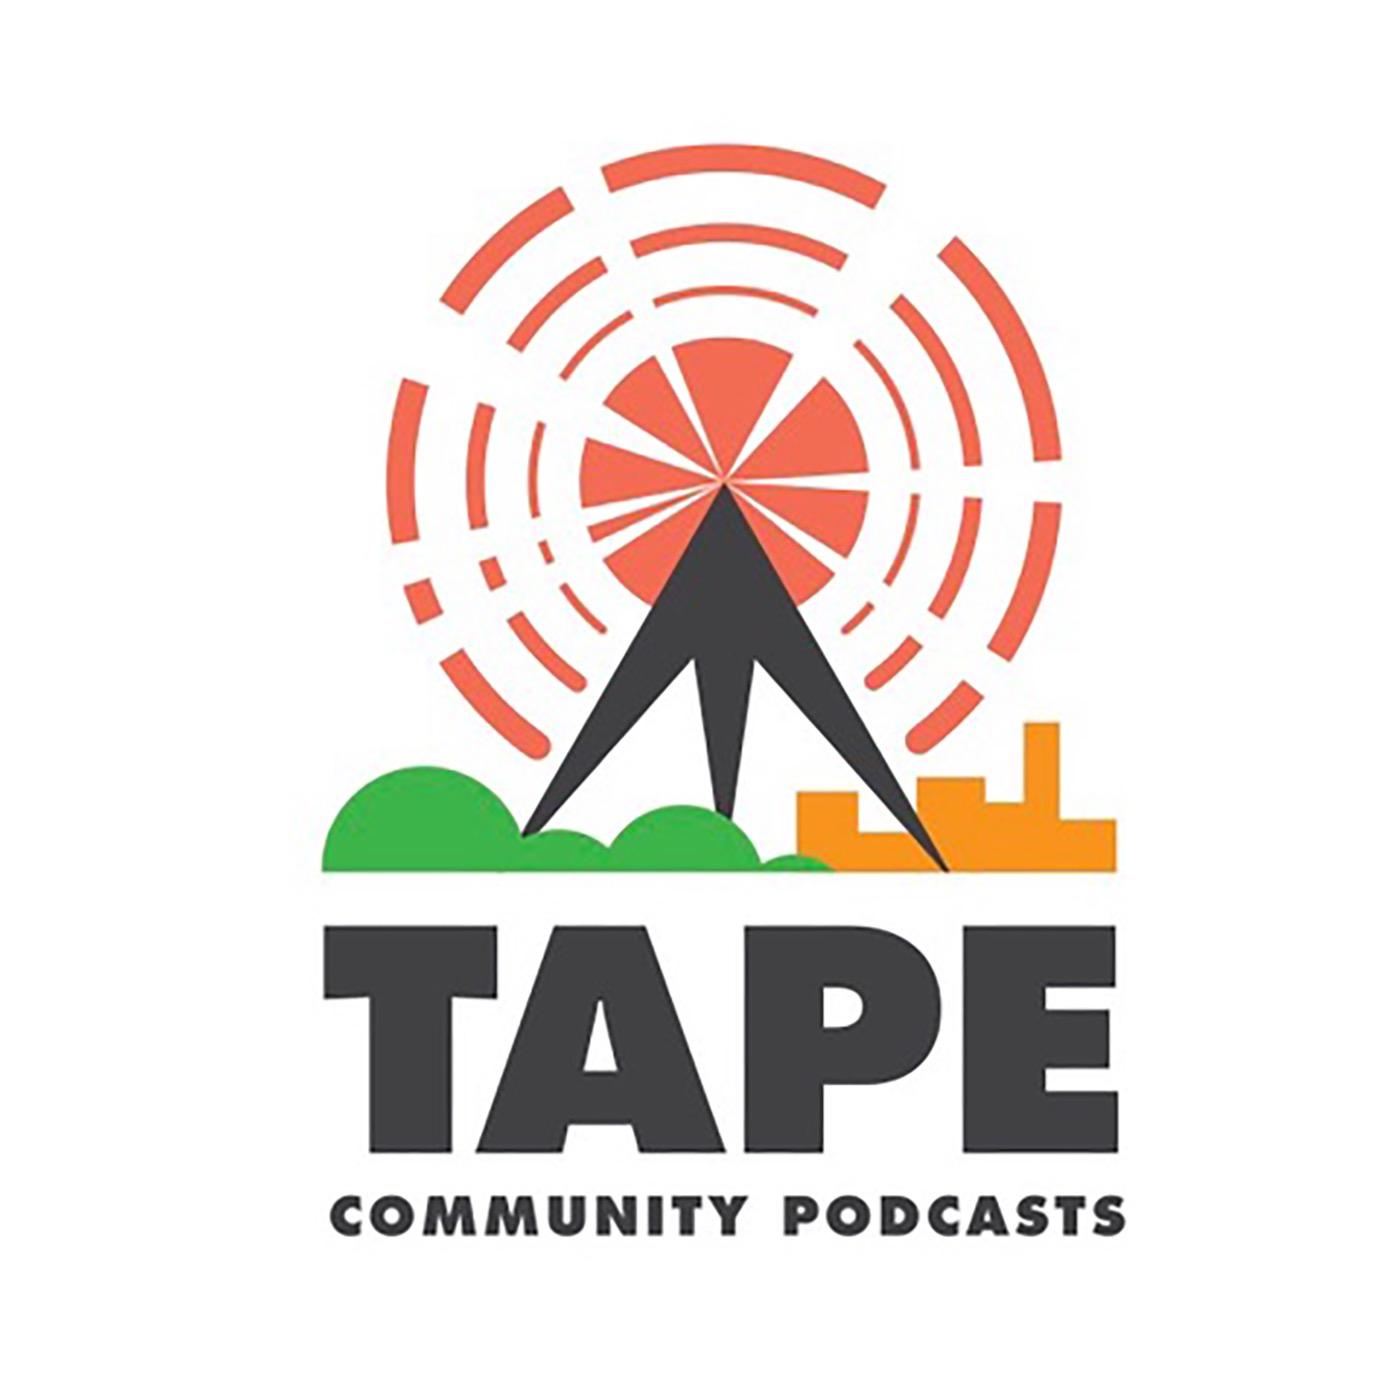 The TAPE Podcast Network